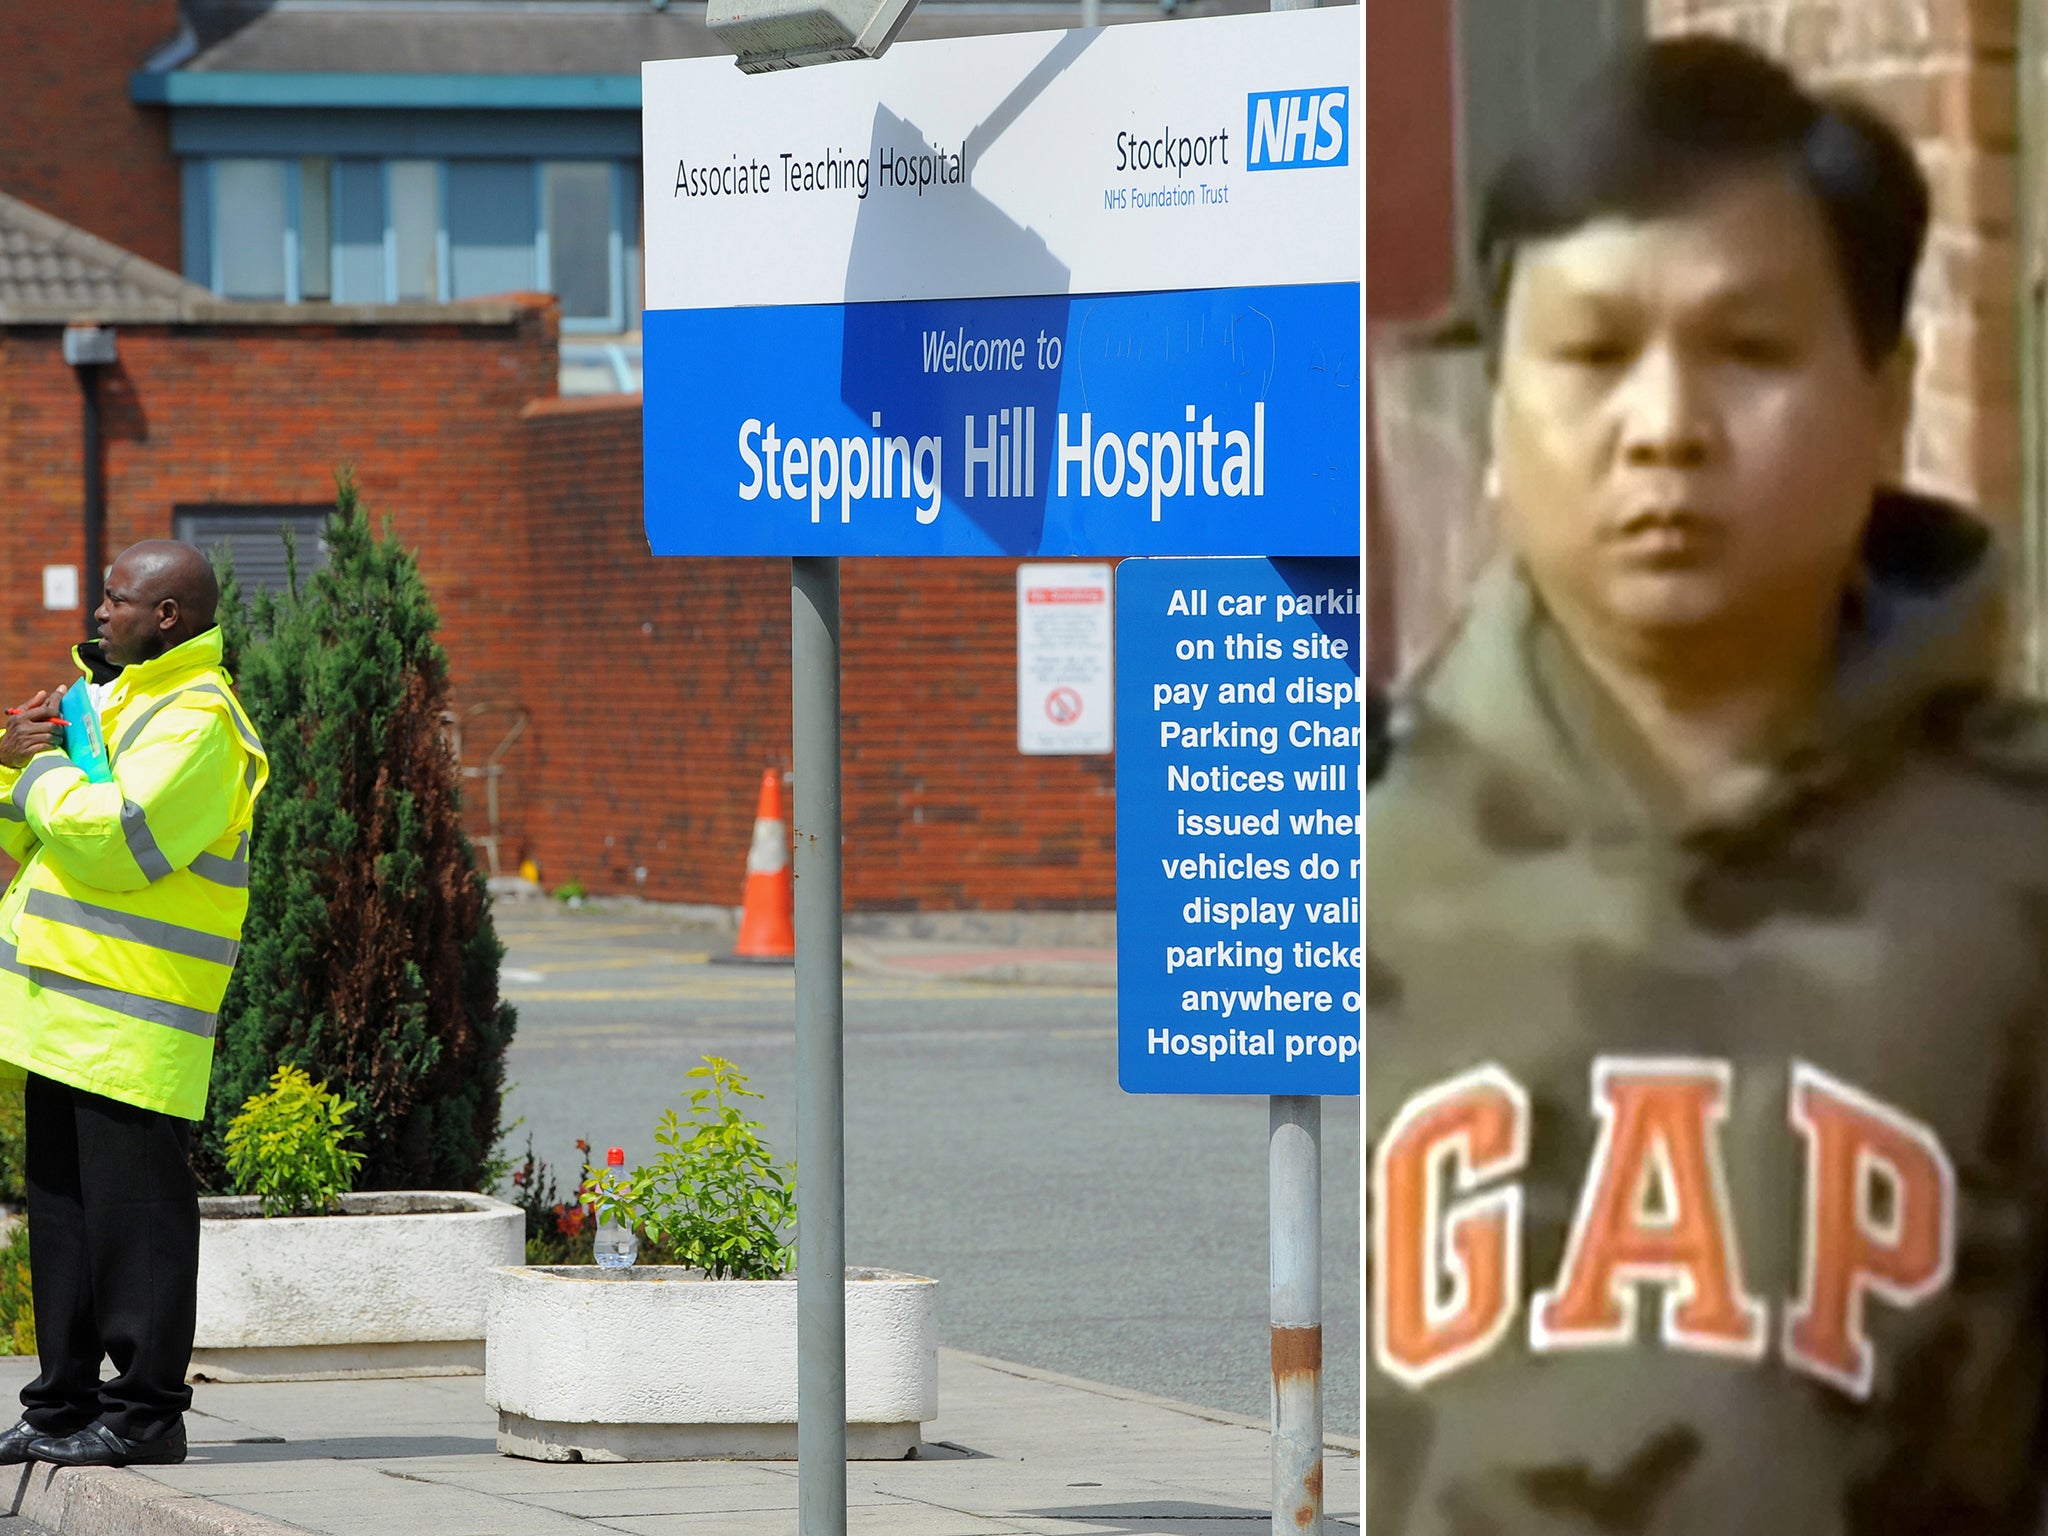 Victorino Chua is accused of murdering three patients and poisoning 18 others at Stepping Hill Hospital